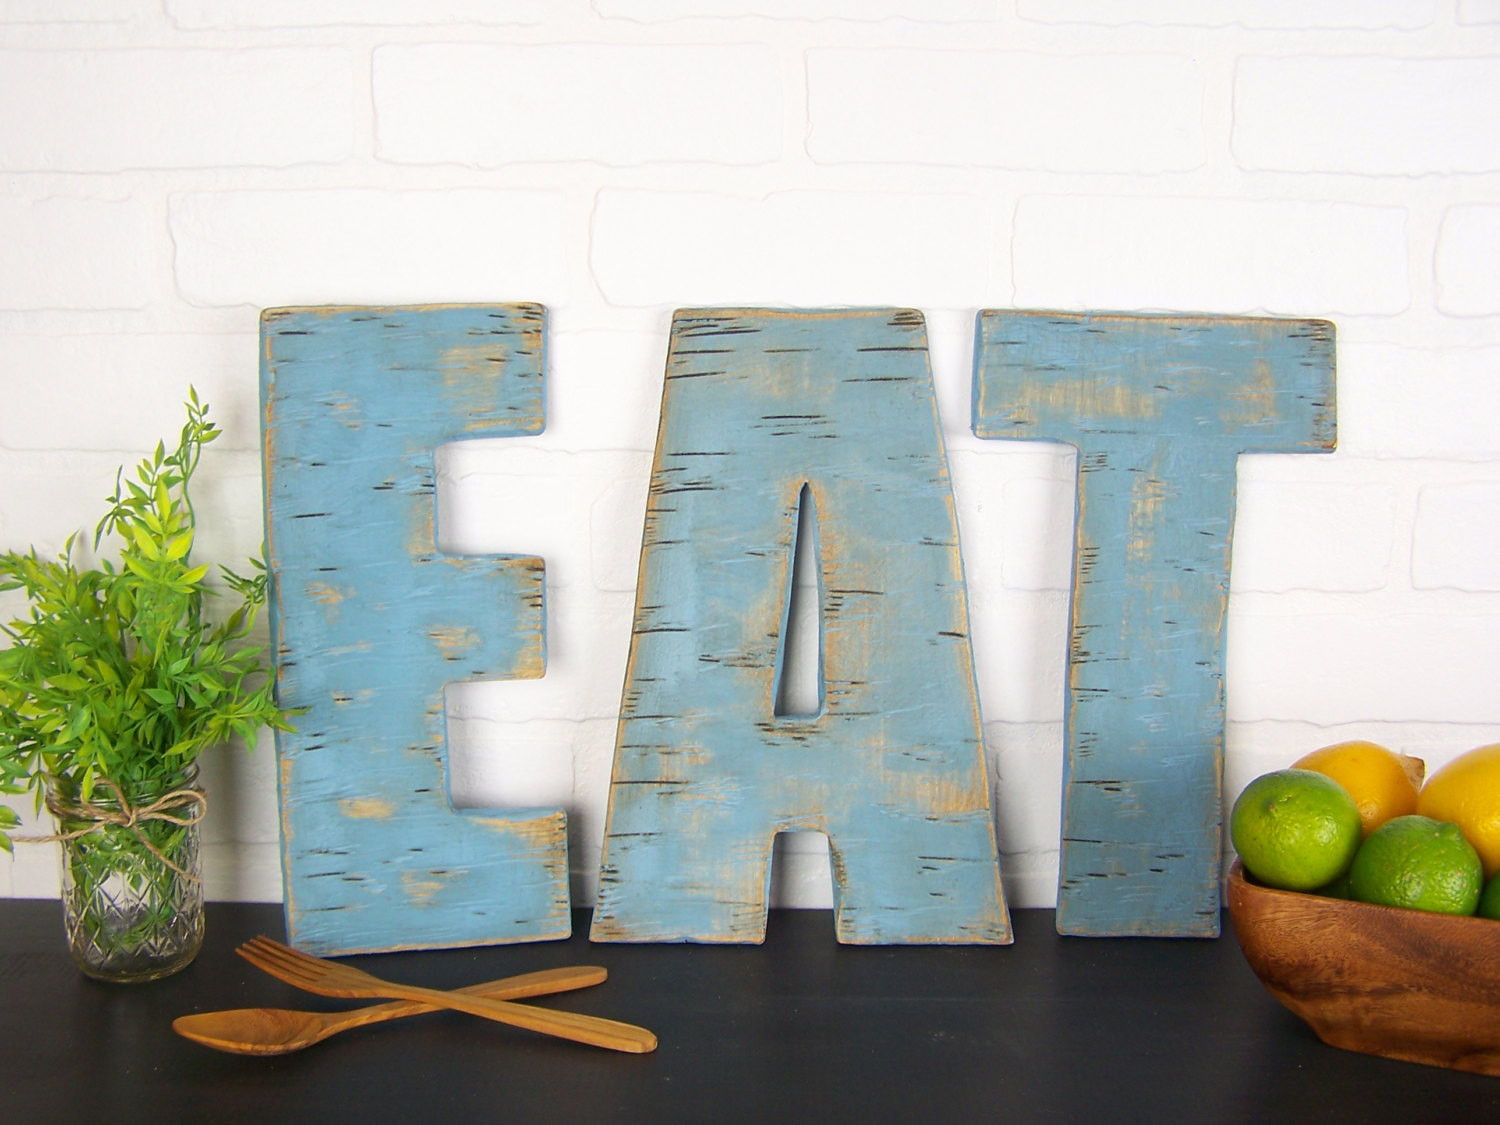 Rustic Kitchen Wall Art
 Rustic Eat Sign Wooden Eat Letters Kitchen Sign Farmhouse